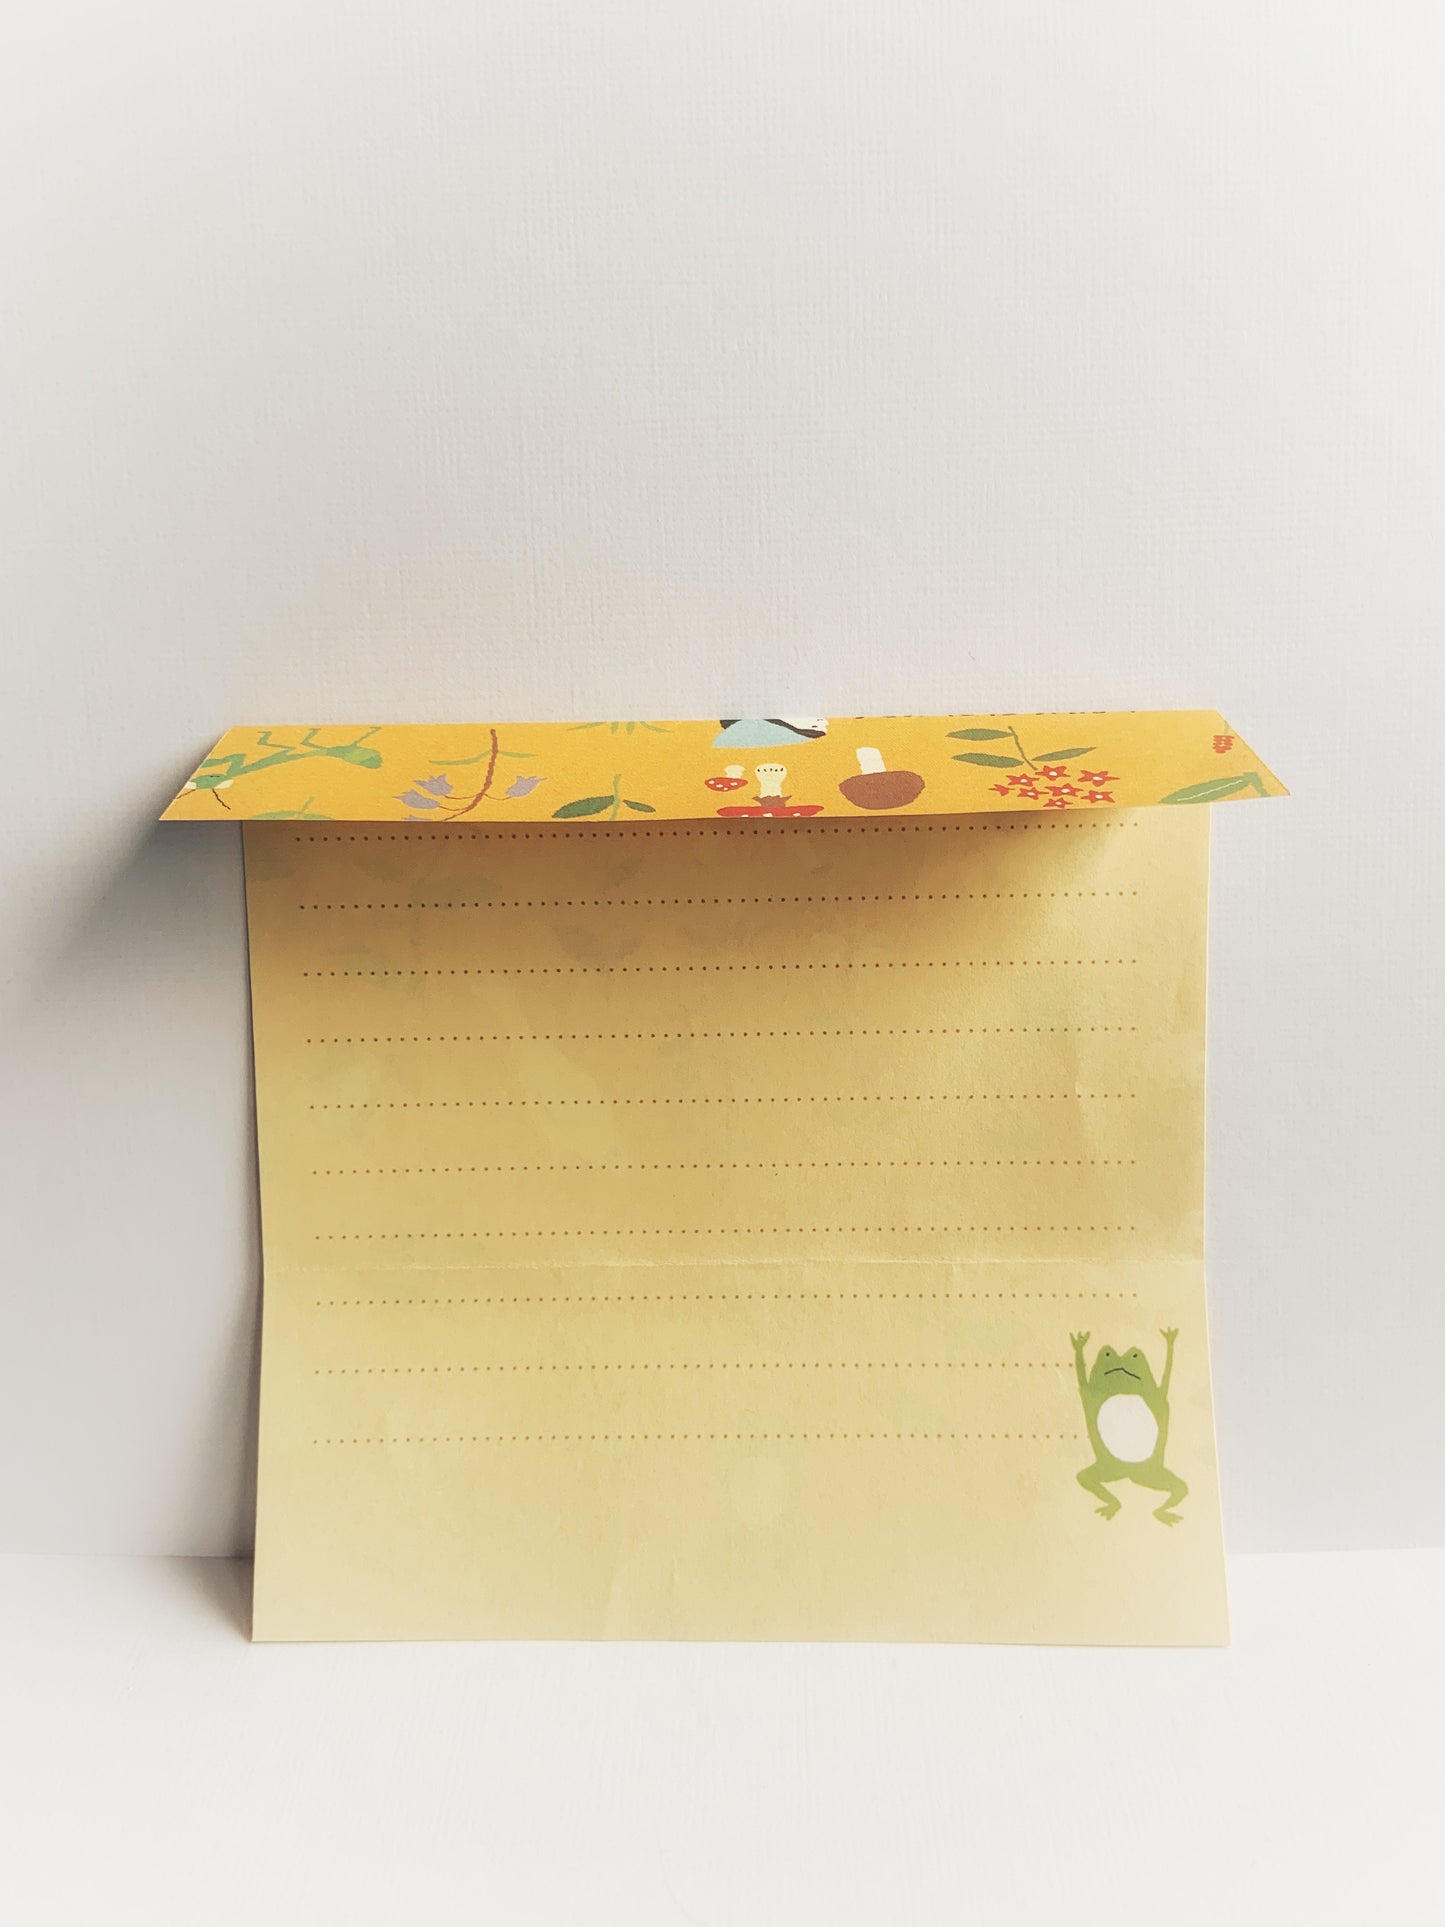 Fun lined notepaper with colorful drawings on one side and a little frog on the other